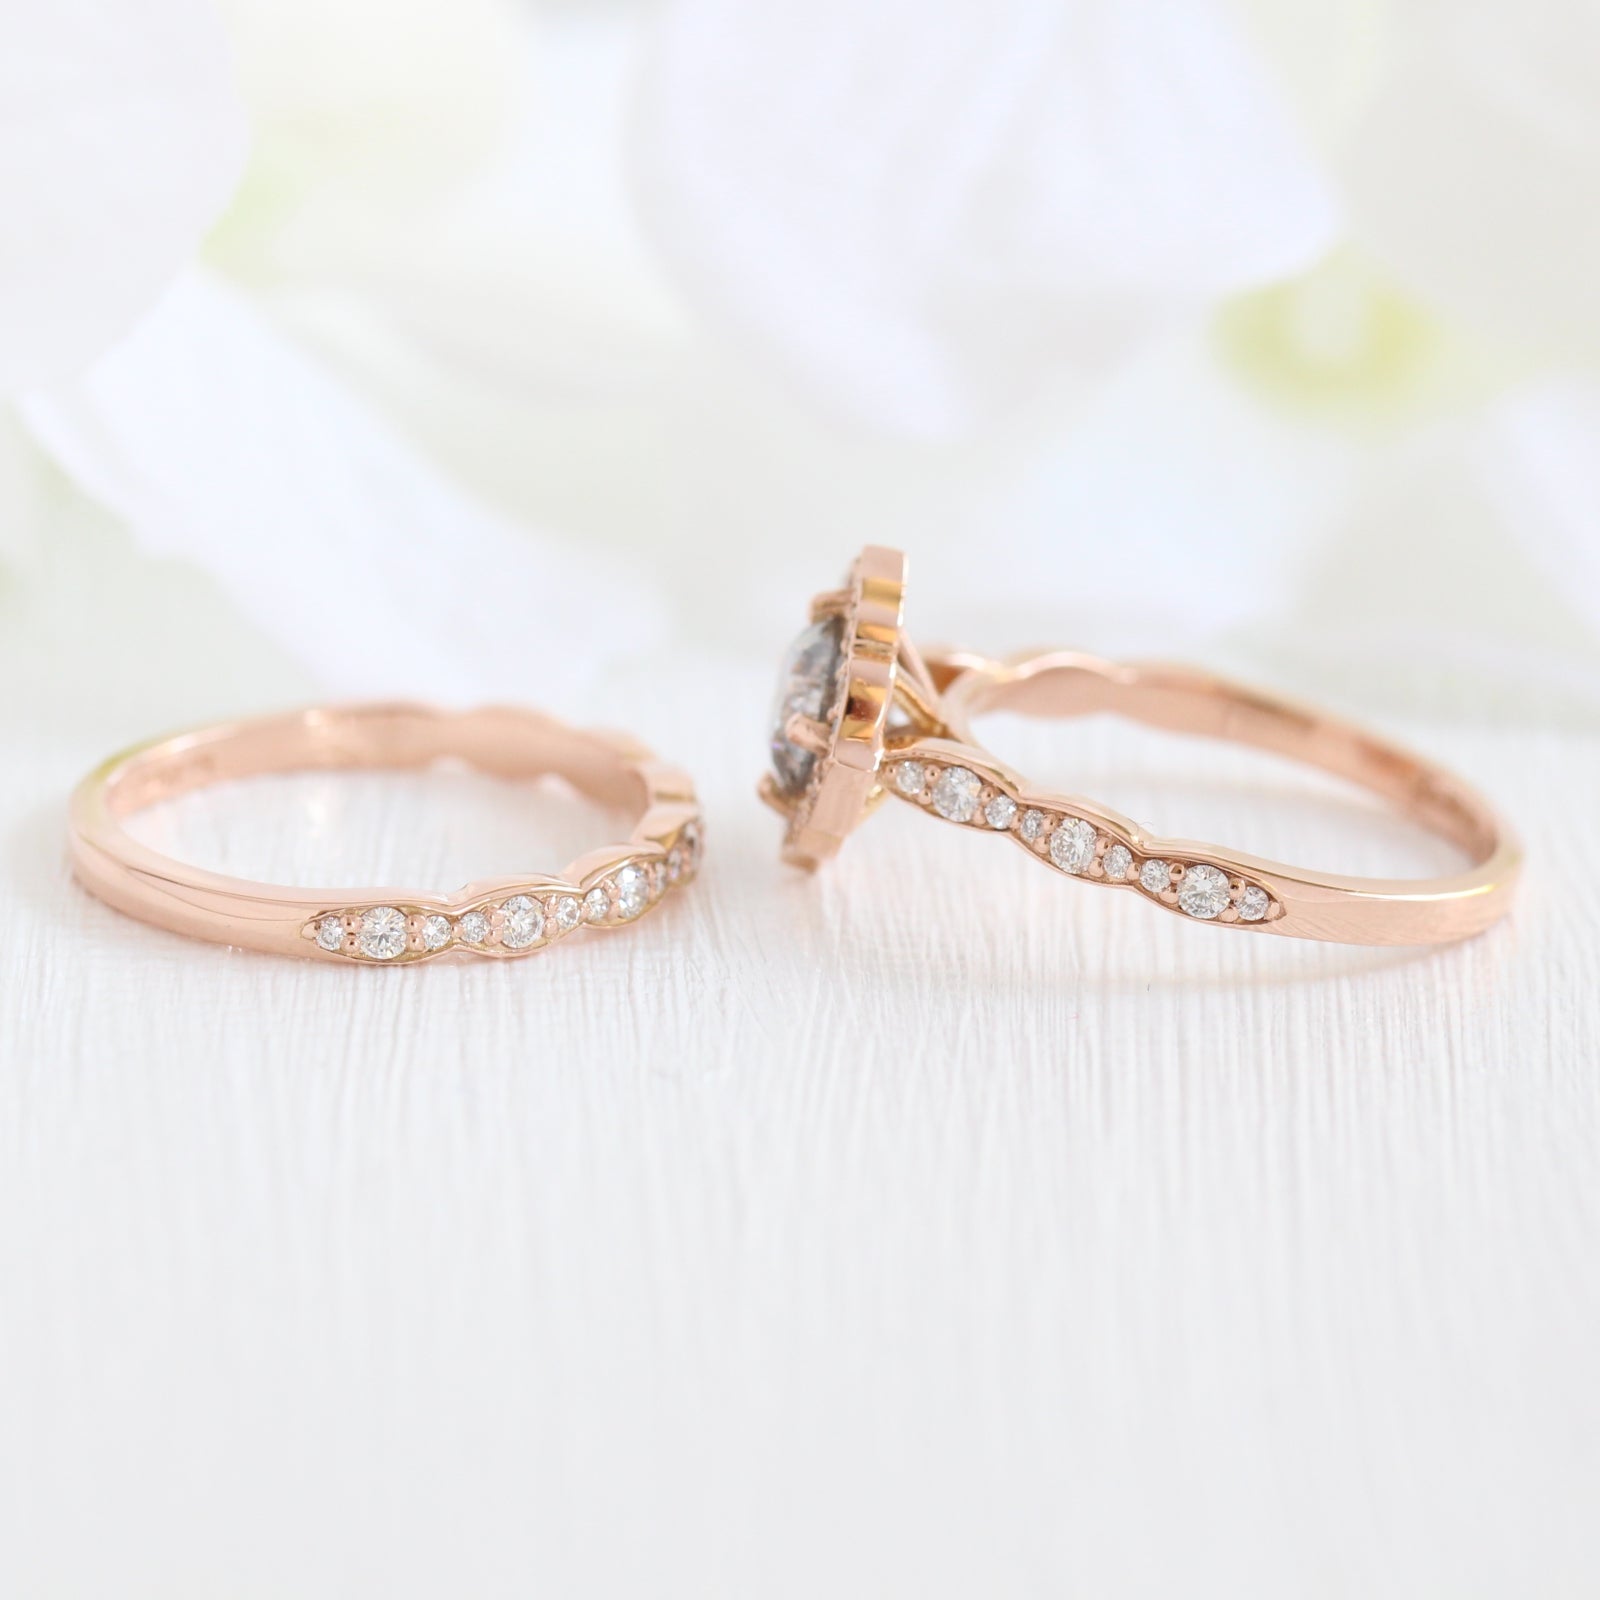 Salt and pepper grey diamond engagement ring rose gold and matching diamond wedding band bridal set by la more design jewelry